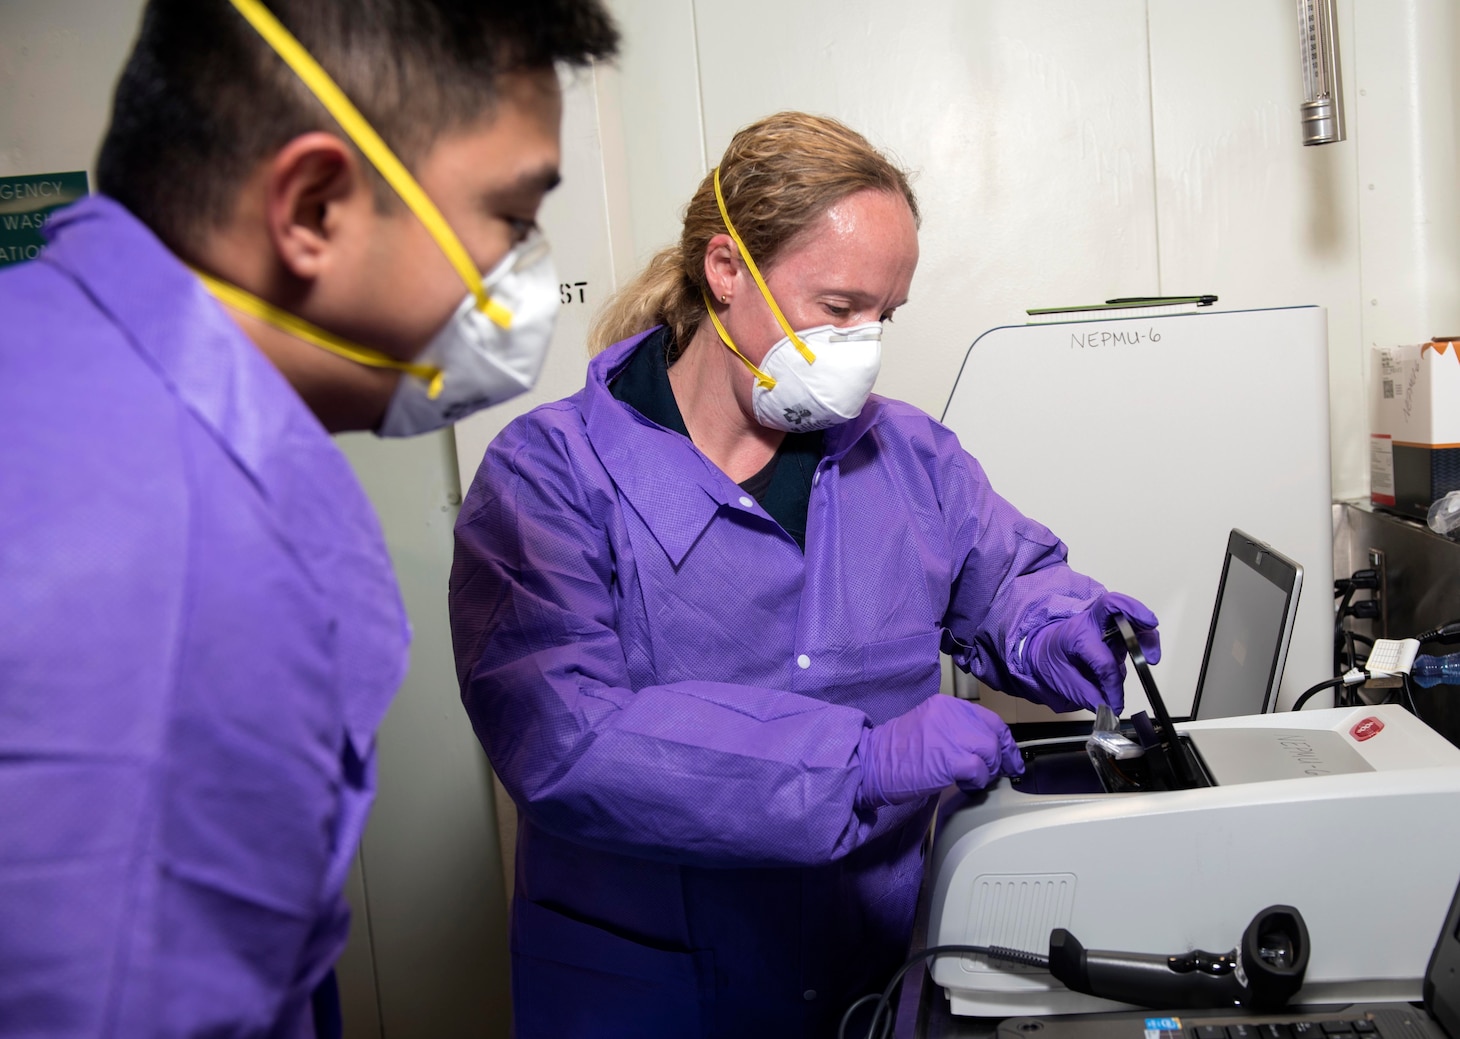 SOUTH CHINA SEA – (March 14, 2020) Members of the Navy’s preventative medicine team Lt. Cmdr. Rebecca Pavlicek, and Hospital Corpsman Gian Molina, both assigned to Navy Environmental Preventative Medicine Unit Six, test samples in a BioFire Film Array, which will test for nearly 30 different diseases, aboard the U.S. 7th Fleet flagship USS Blue Ridge (LCC 19). To date, no cases of COVID-19 have been detected aboard any 7th Fleet U.S. Navy vessels, but if a case were to arise, ships have isolation plans in place to contain the infection. As the U.S. Navy's largest forward-deployed fleet, 7th Fleet operates roughly 50-70 ships and submarines and 140 aircraft with approximately 20,000 Sailors.